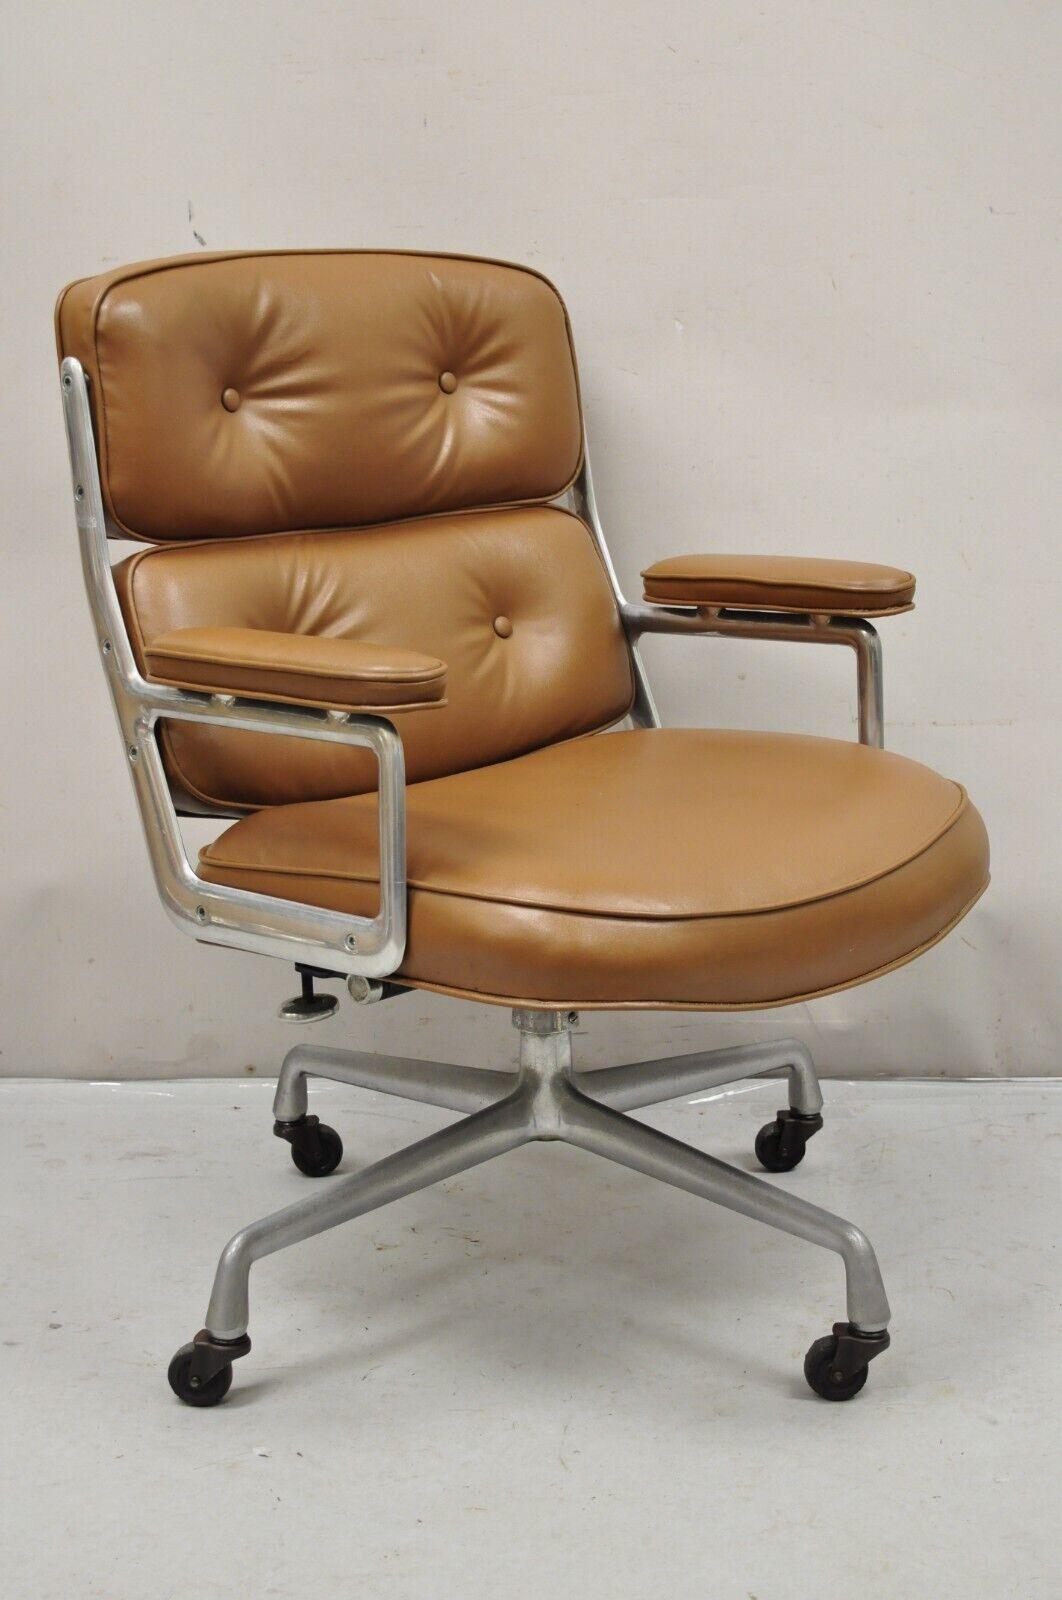 Herman Miller Eames Time Life Brown Faux Leather Rolling Office Desk Chair. Circa aluminum metal frame, adjustable height, original label, quality American craftsmanship, great style and form. Circa 960s. Measurements: 37